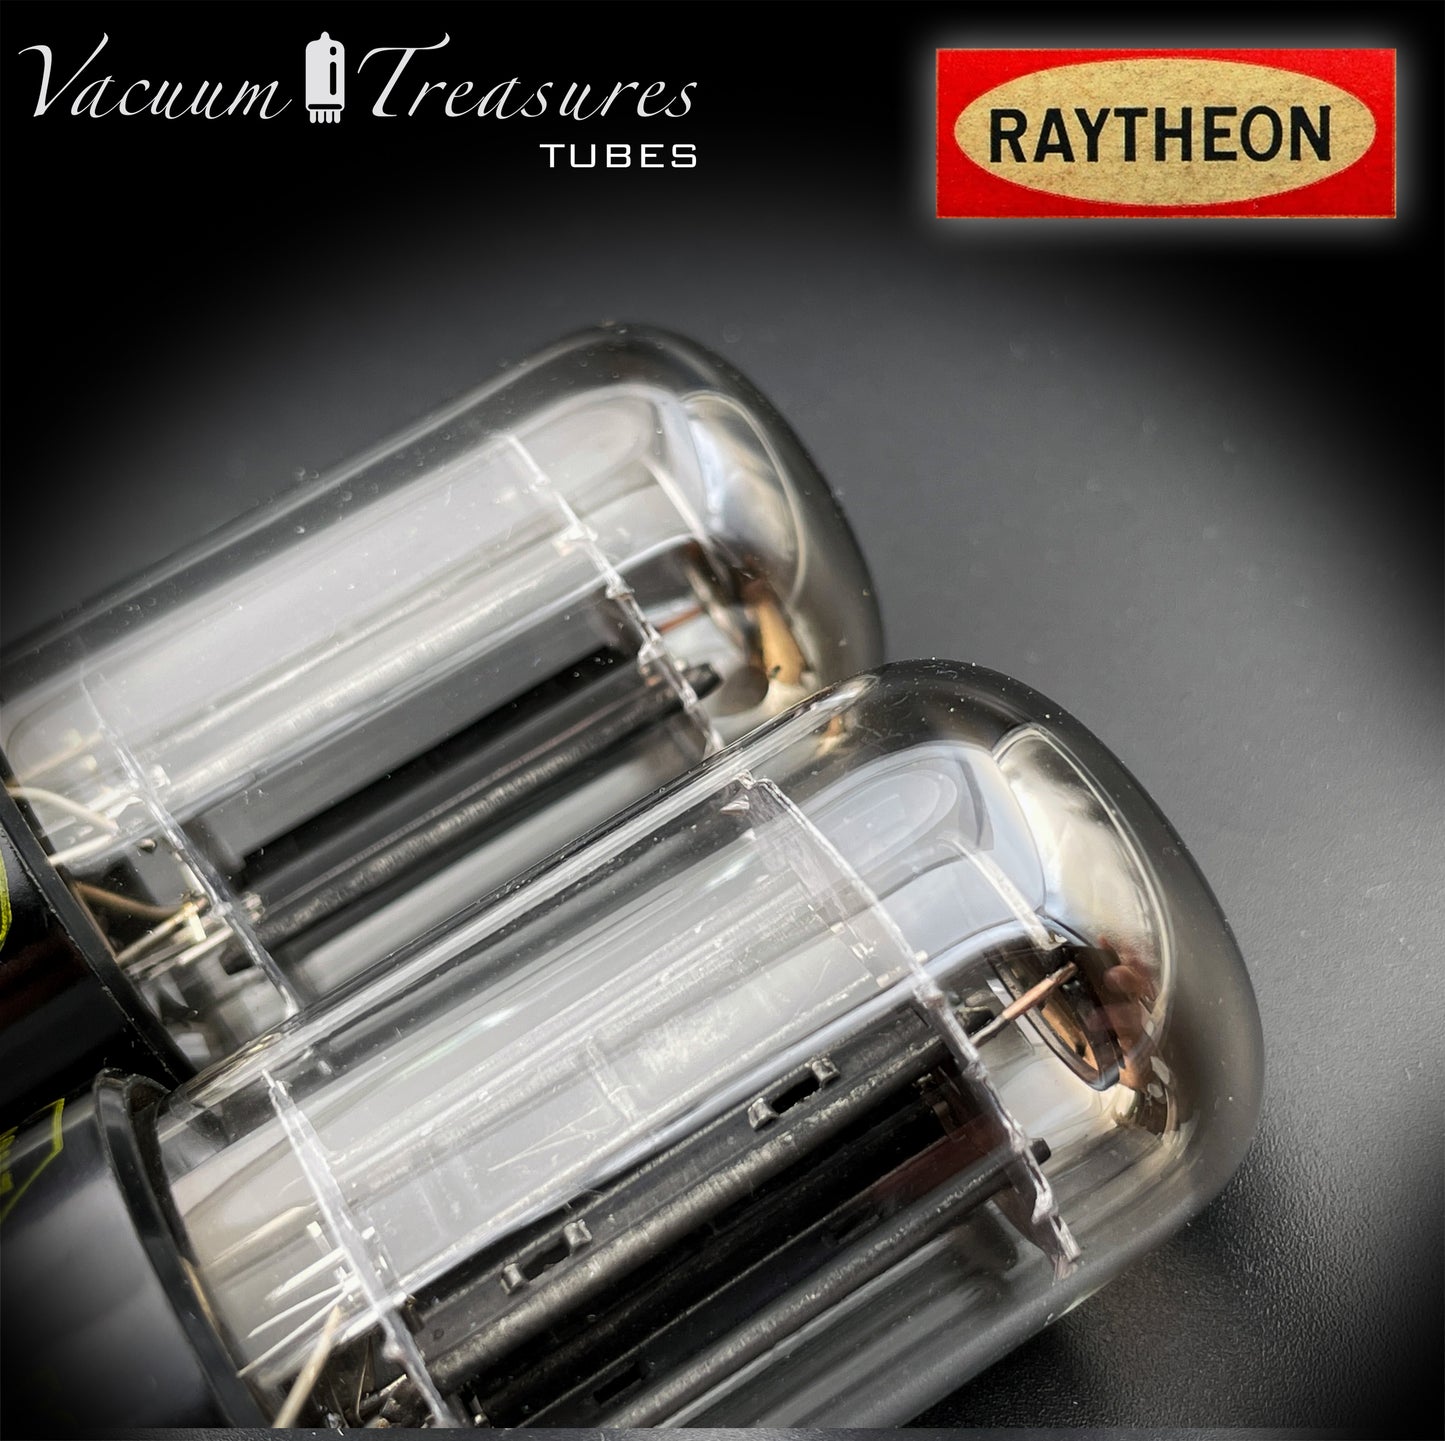 6SN7 GTB NOS RAYTHEON Black Plates O Getter Matched Tubes Made in USA '59